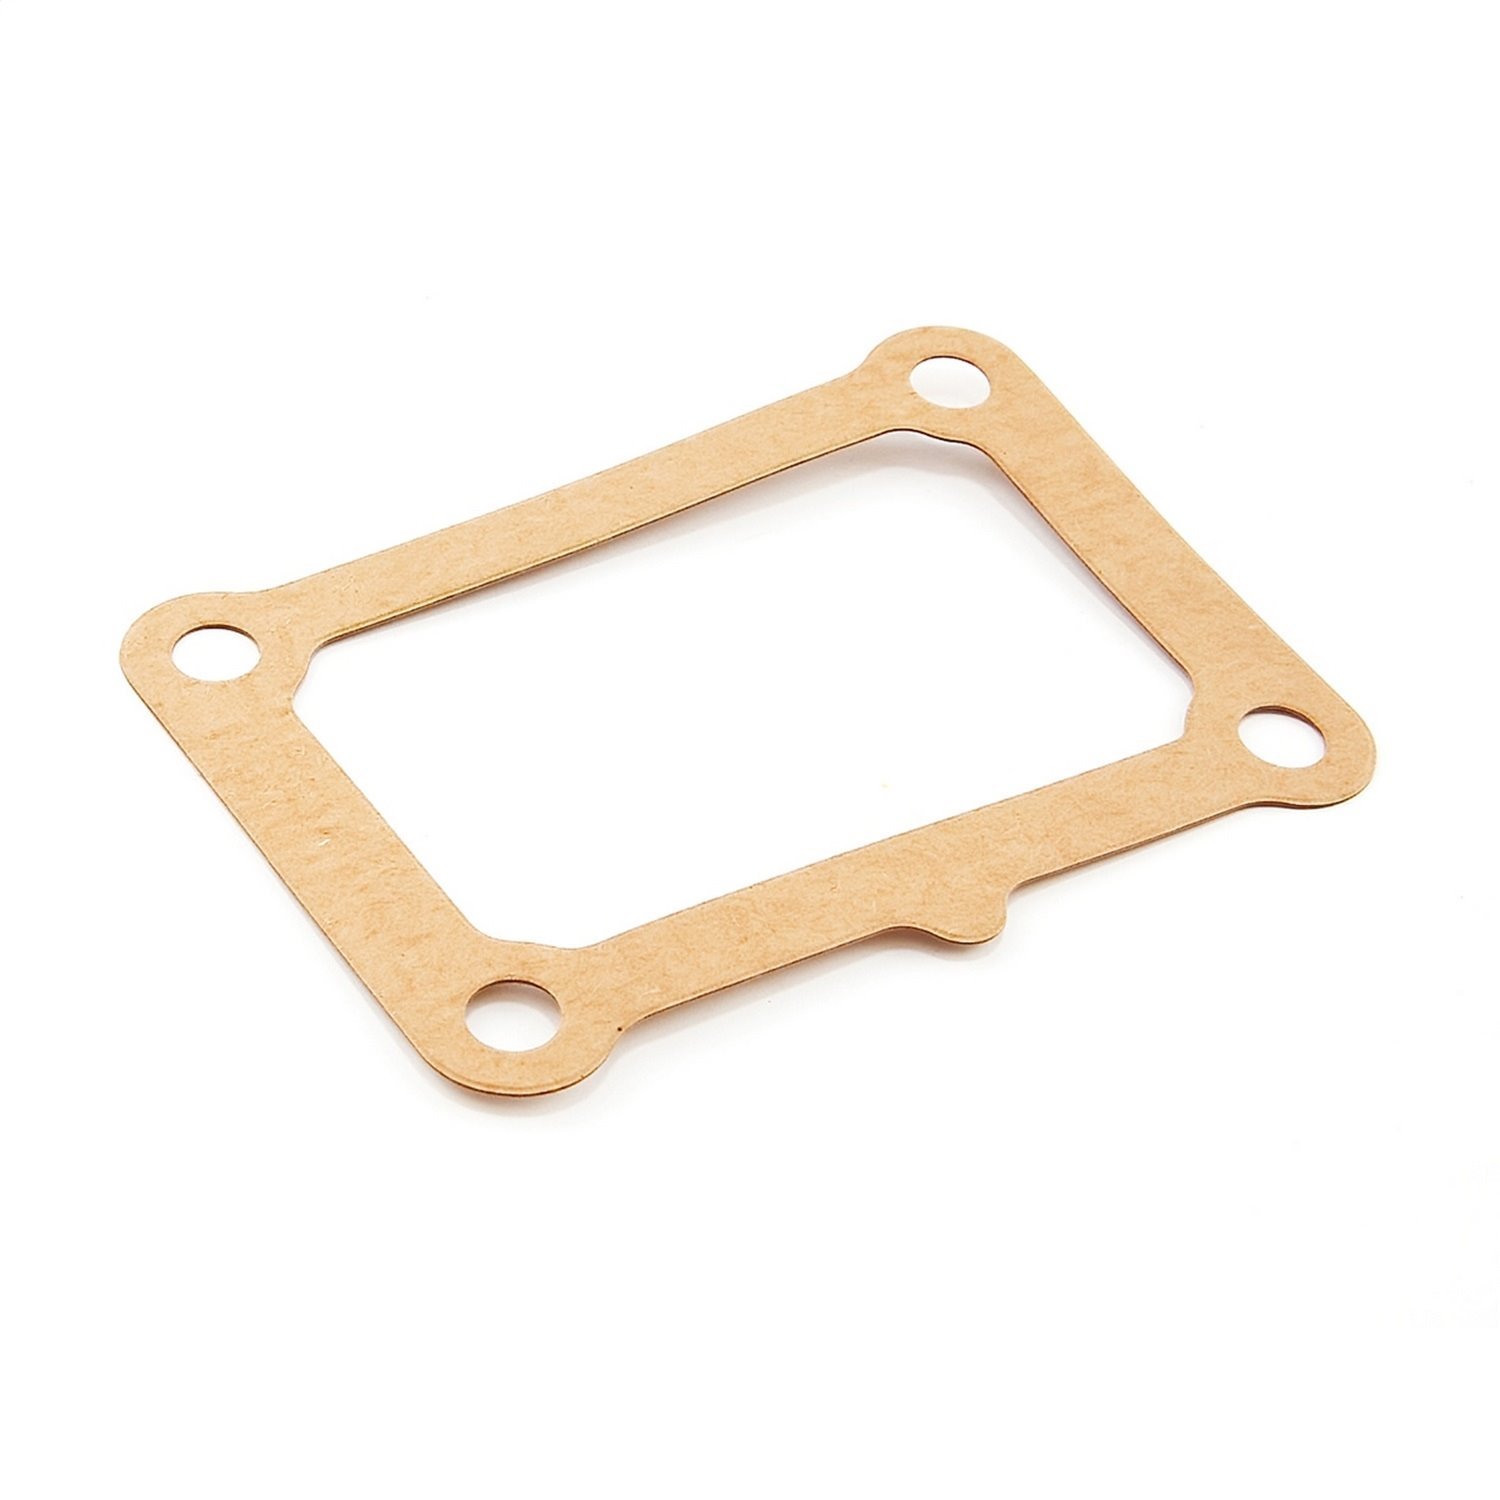 AX5 Shift Gasket 1987-2002 Jeep Wrangler By Omix-ADA